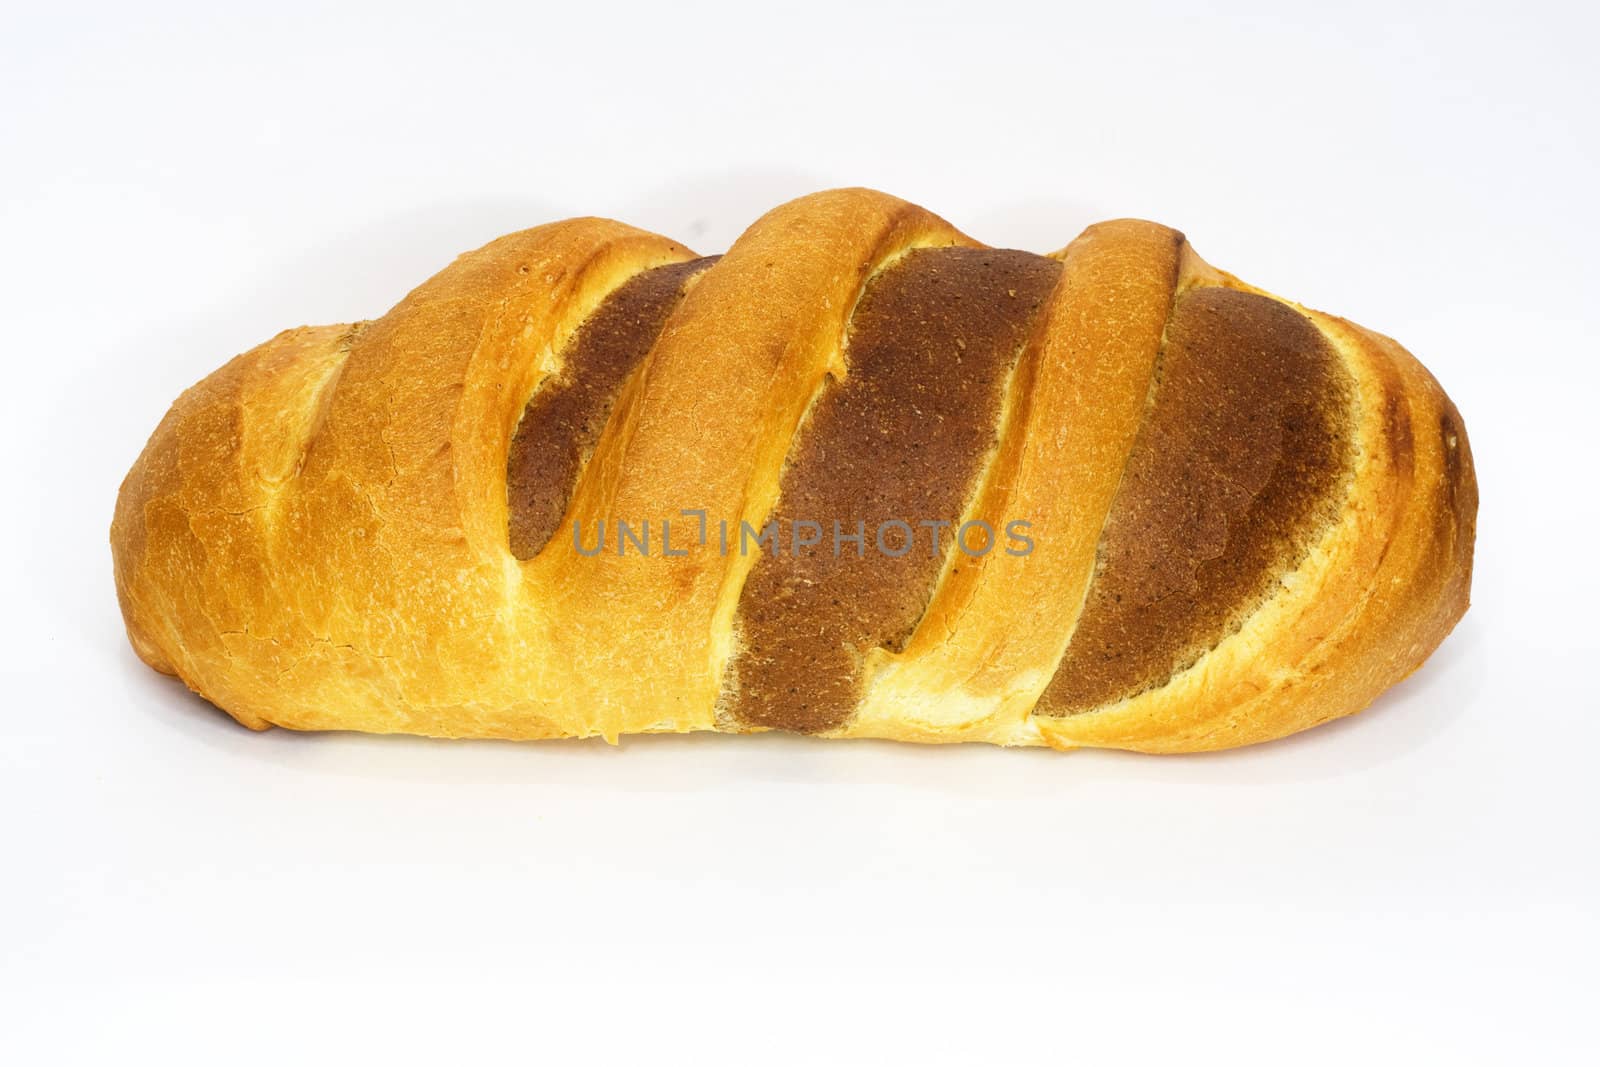 yummy juicy bread on a white background 